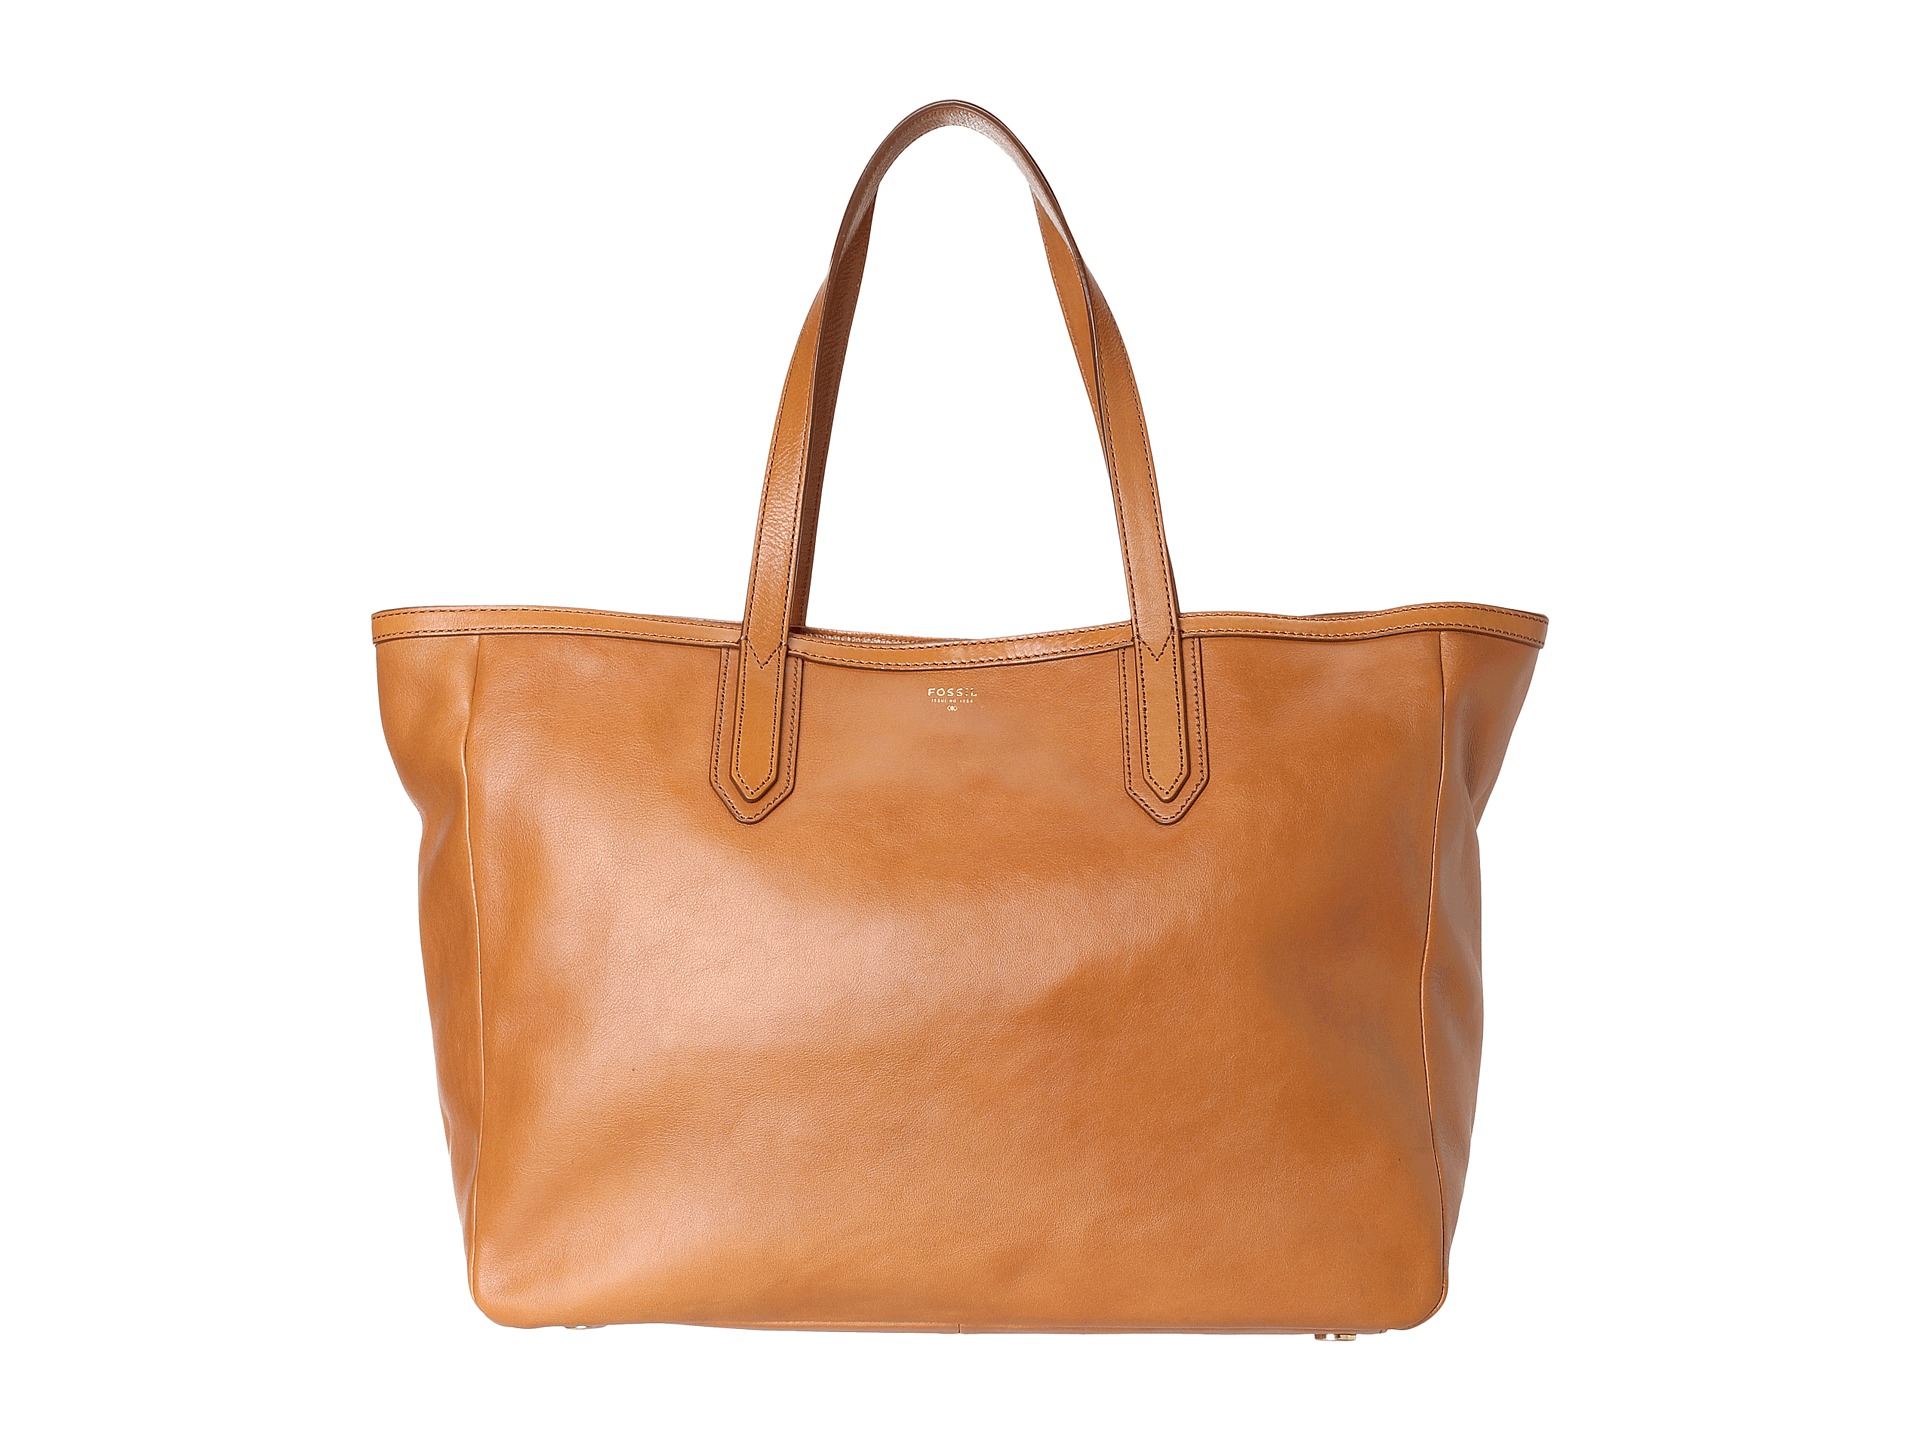 Fossil Sydney Tote Camel, Bags, Women | Shipped Free at Zappos